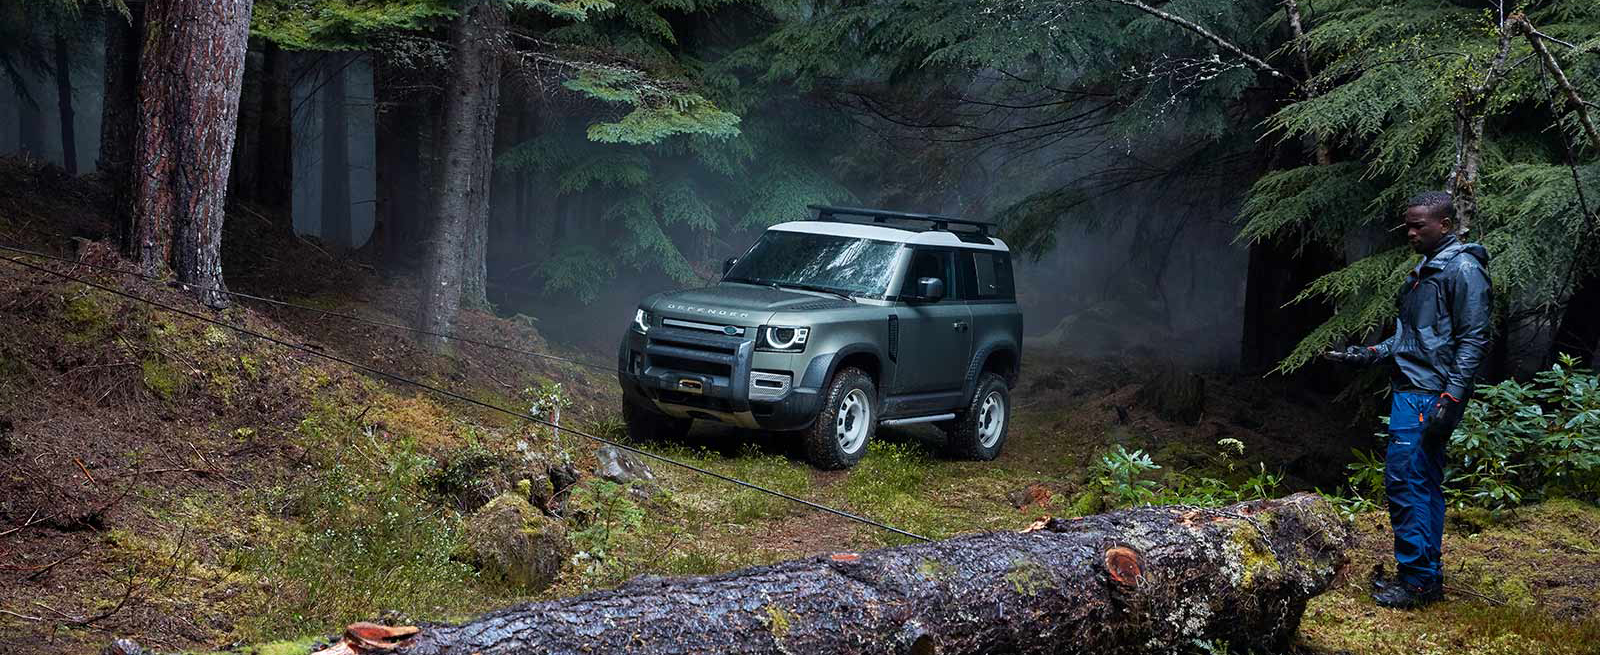 Green New Defender 90 Using Front Winch in a Forest